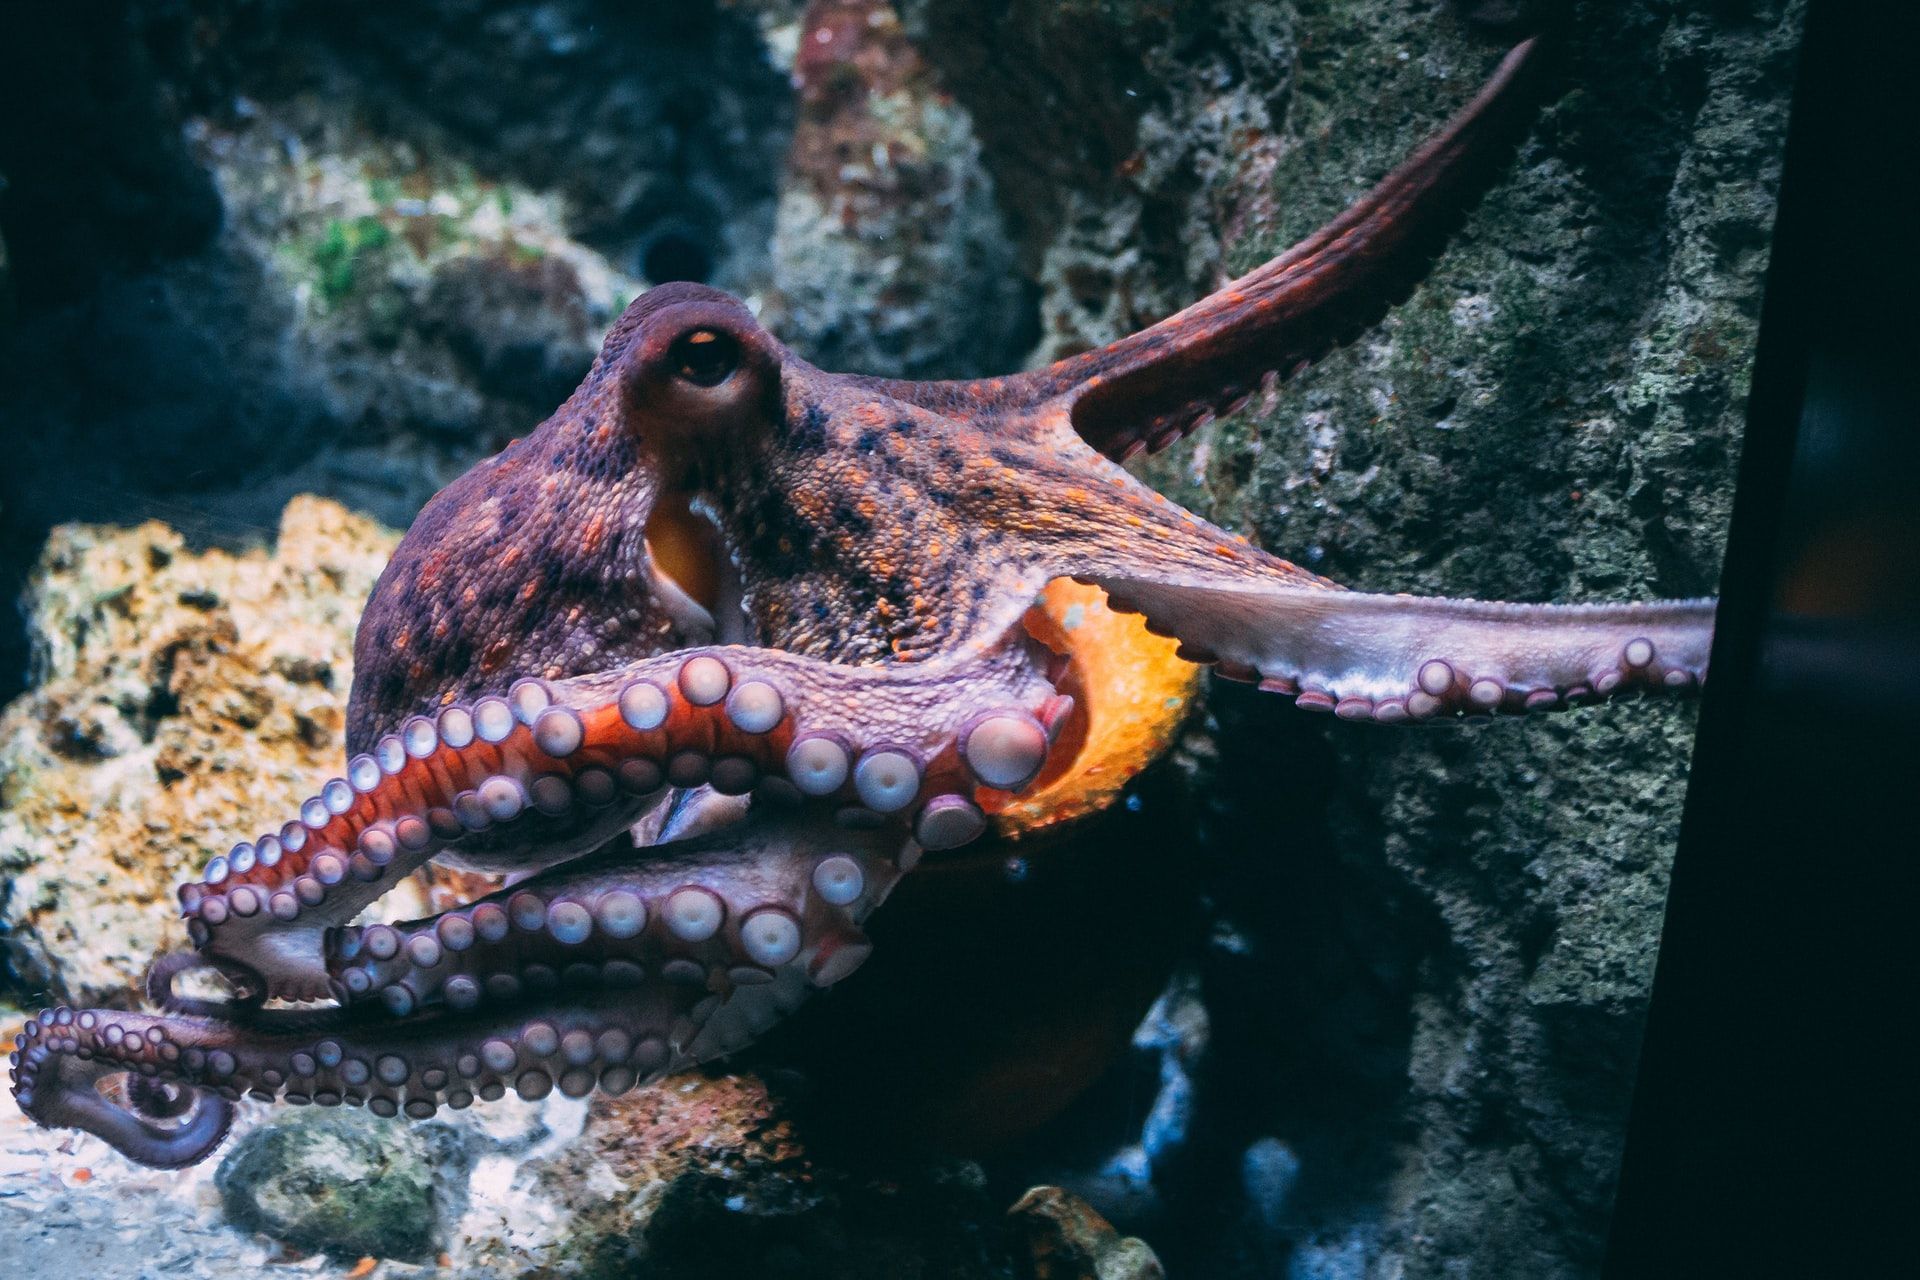 Alien Octopuses: A Scientific Paper Claims They Came From Outer Space